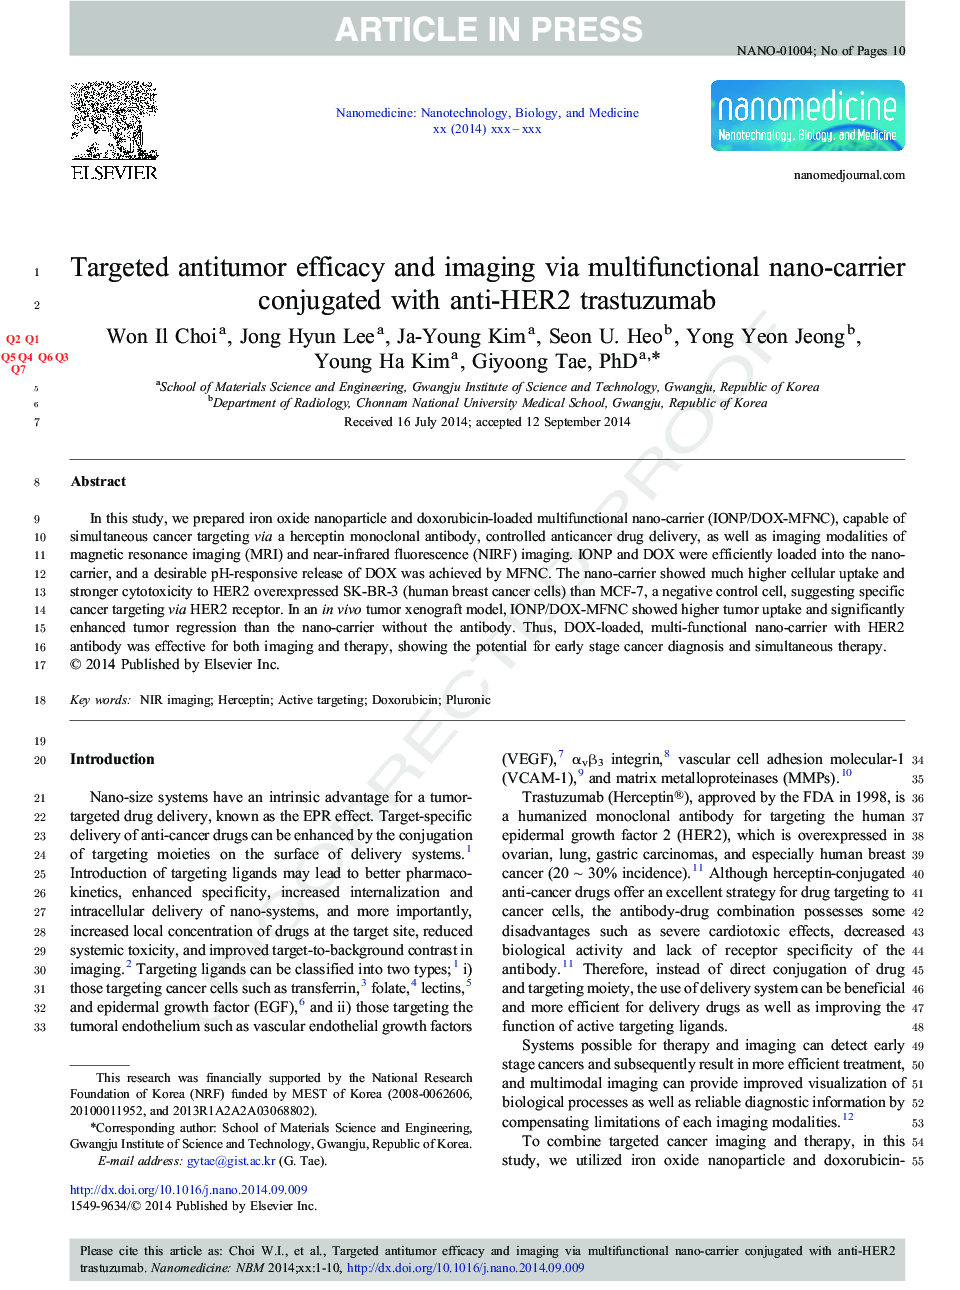 Targeted antitumor efficacy and imaging via multifunctional nano-carrier conjugated with anti-HER2 trastuzumab